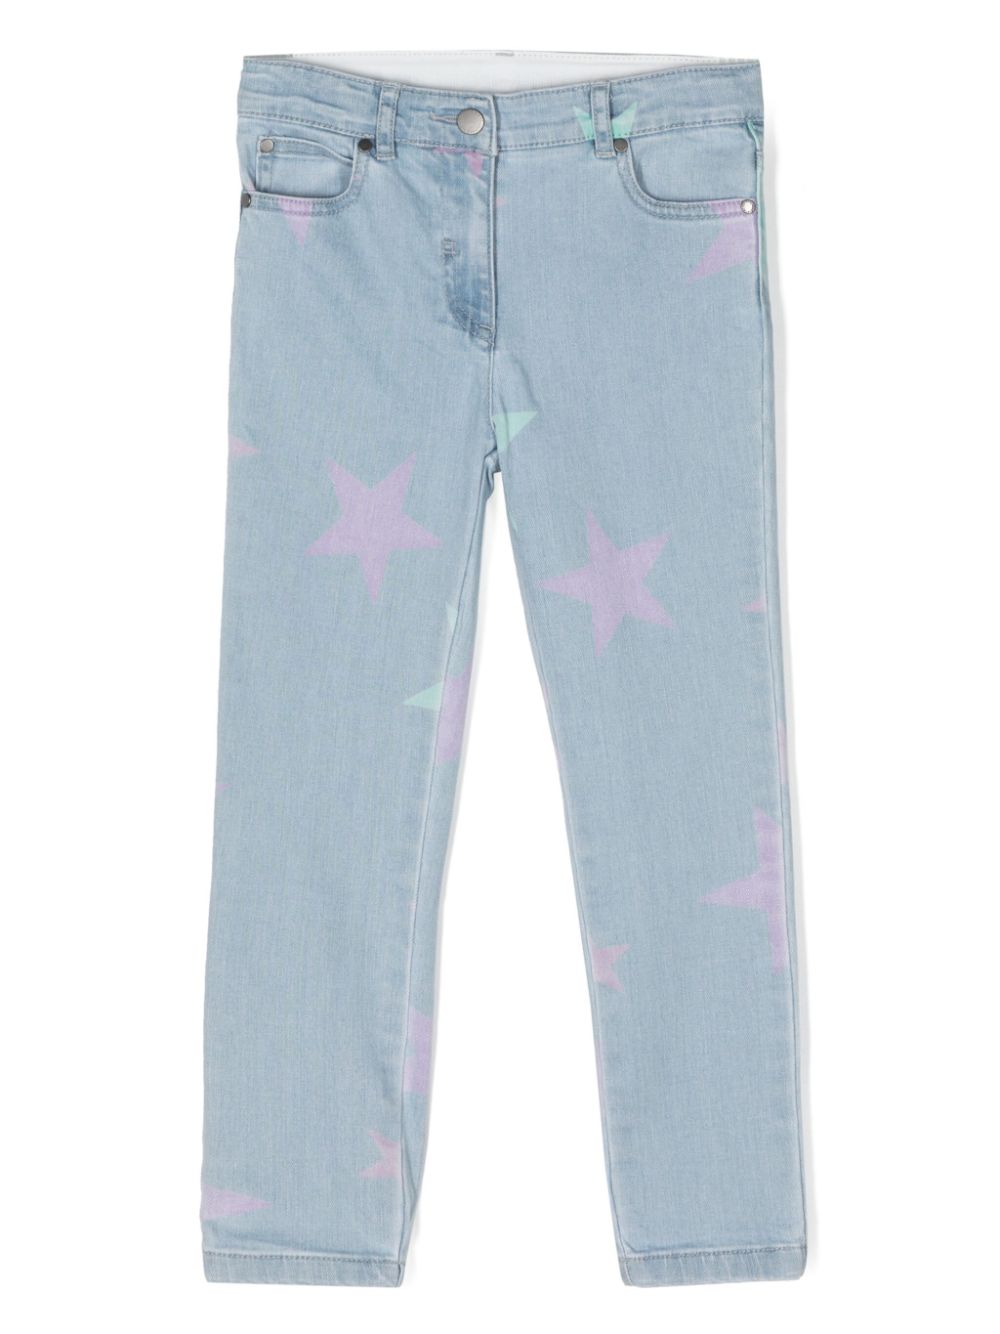 Light blue jeans for girls with stars